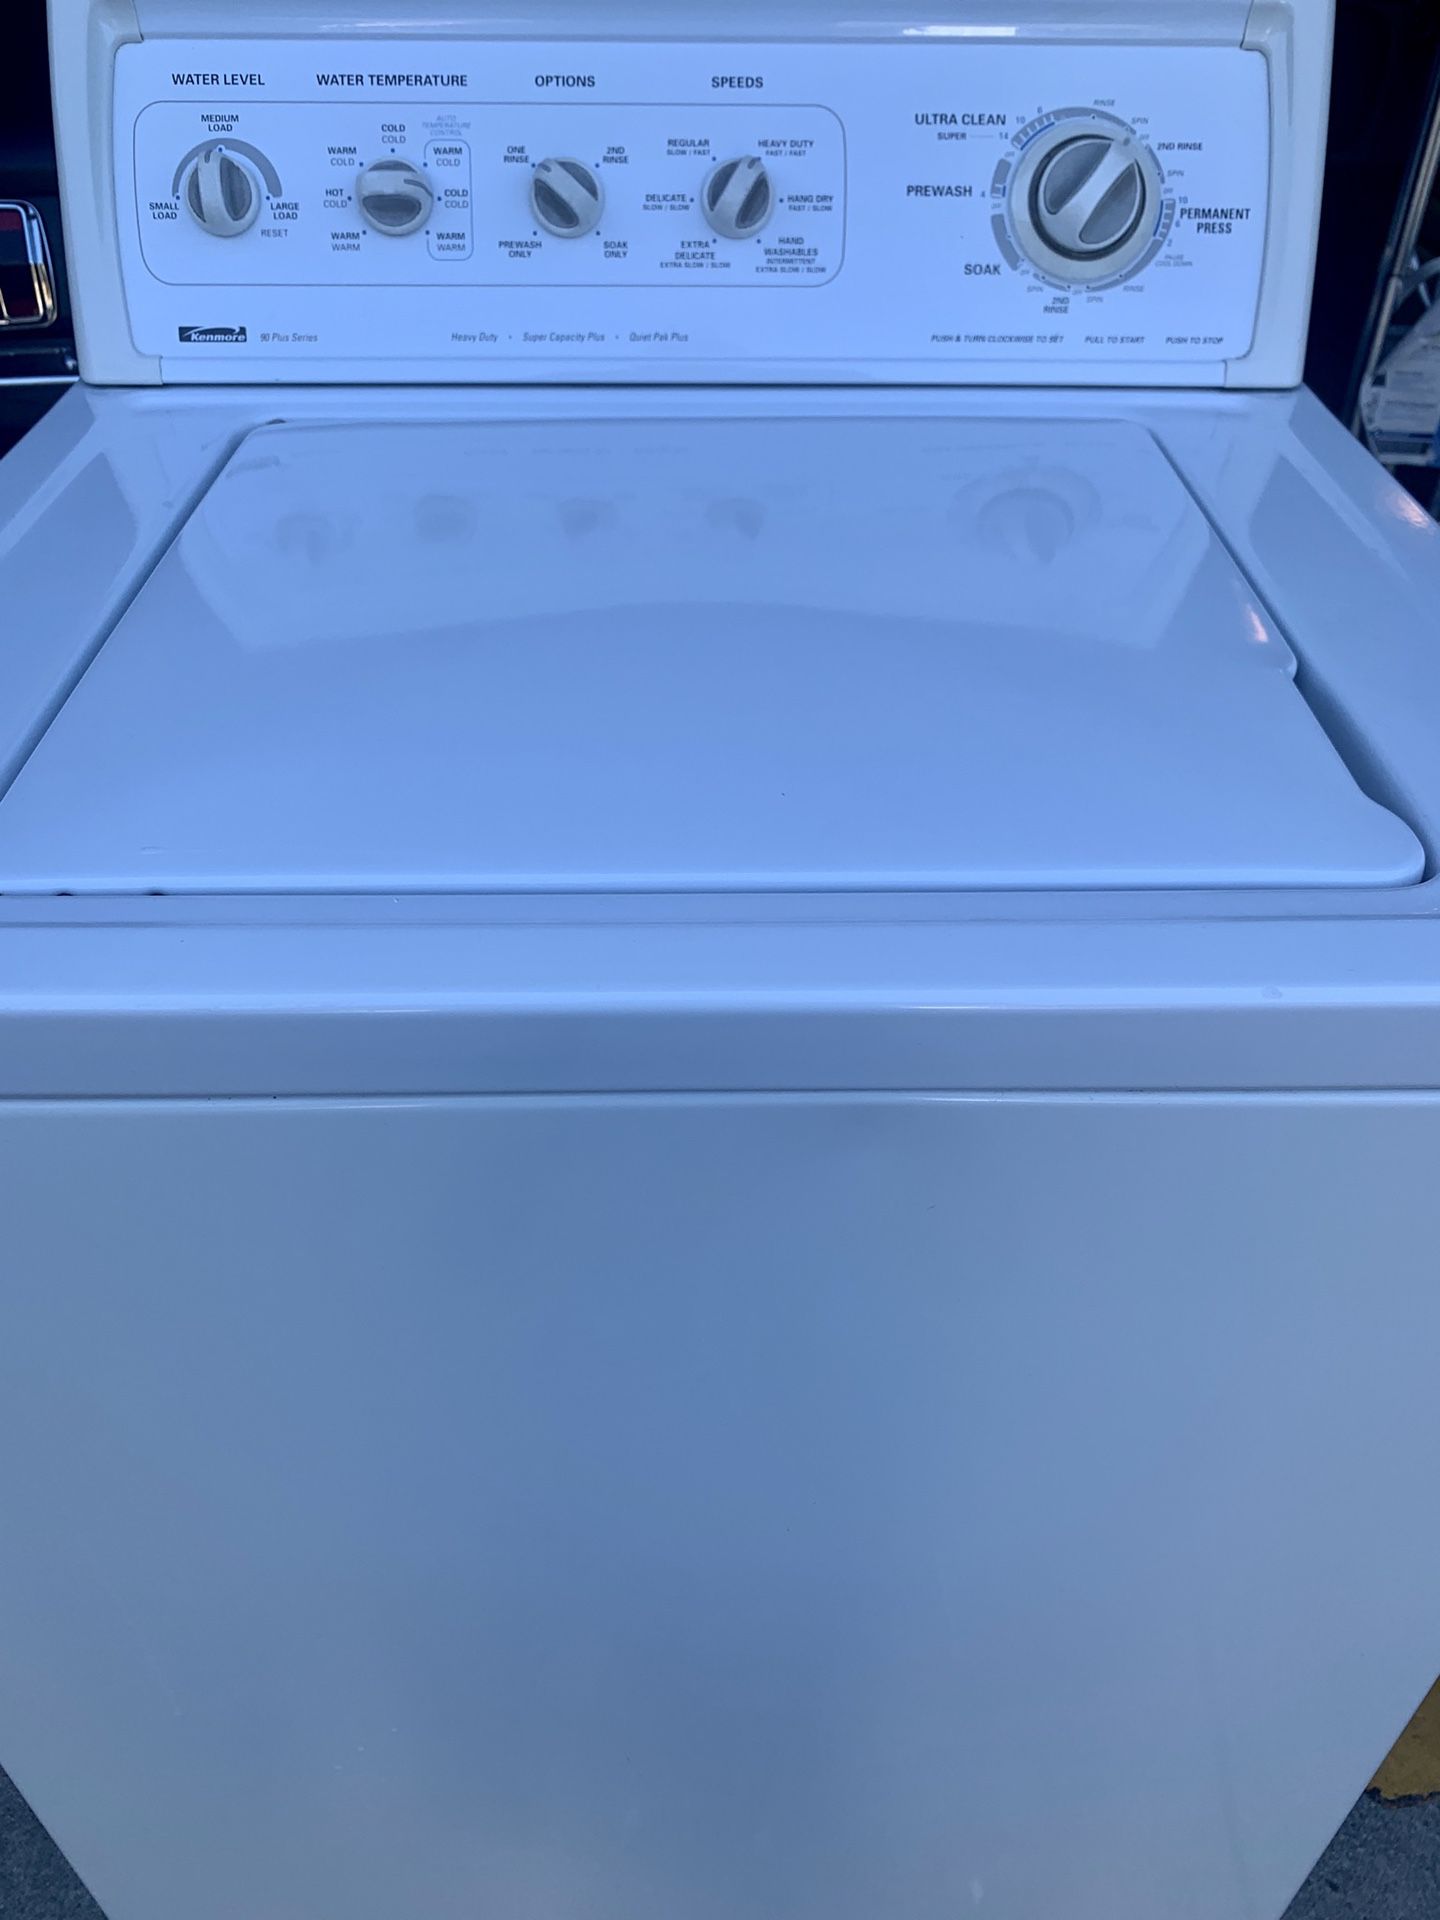 Kenmore Heavy Duty Washer in great condition